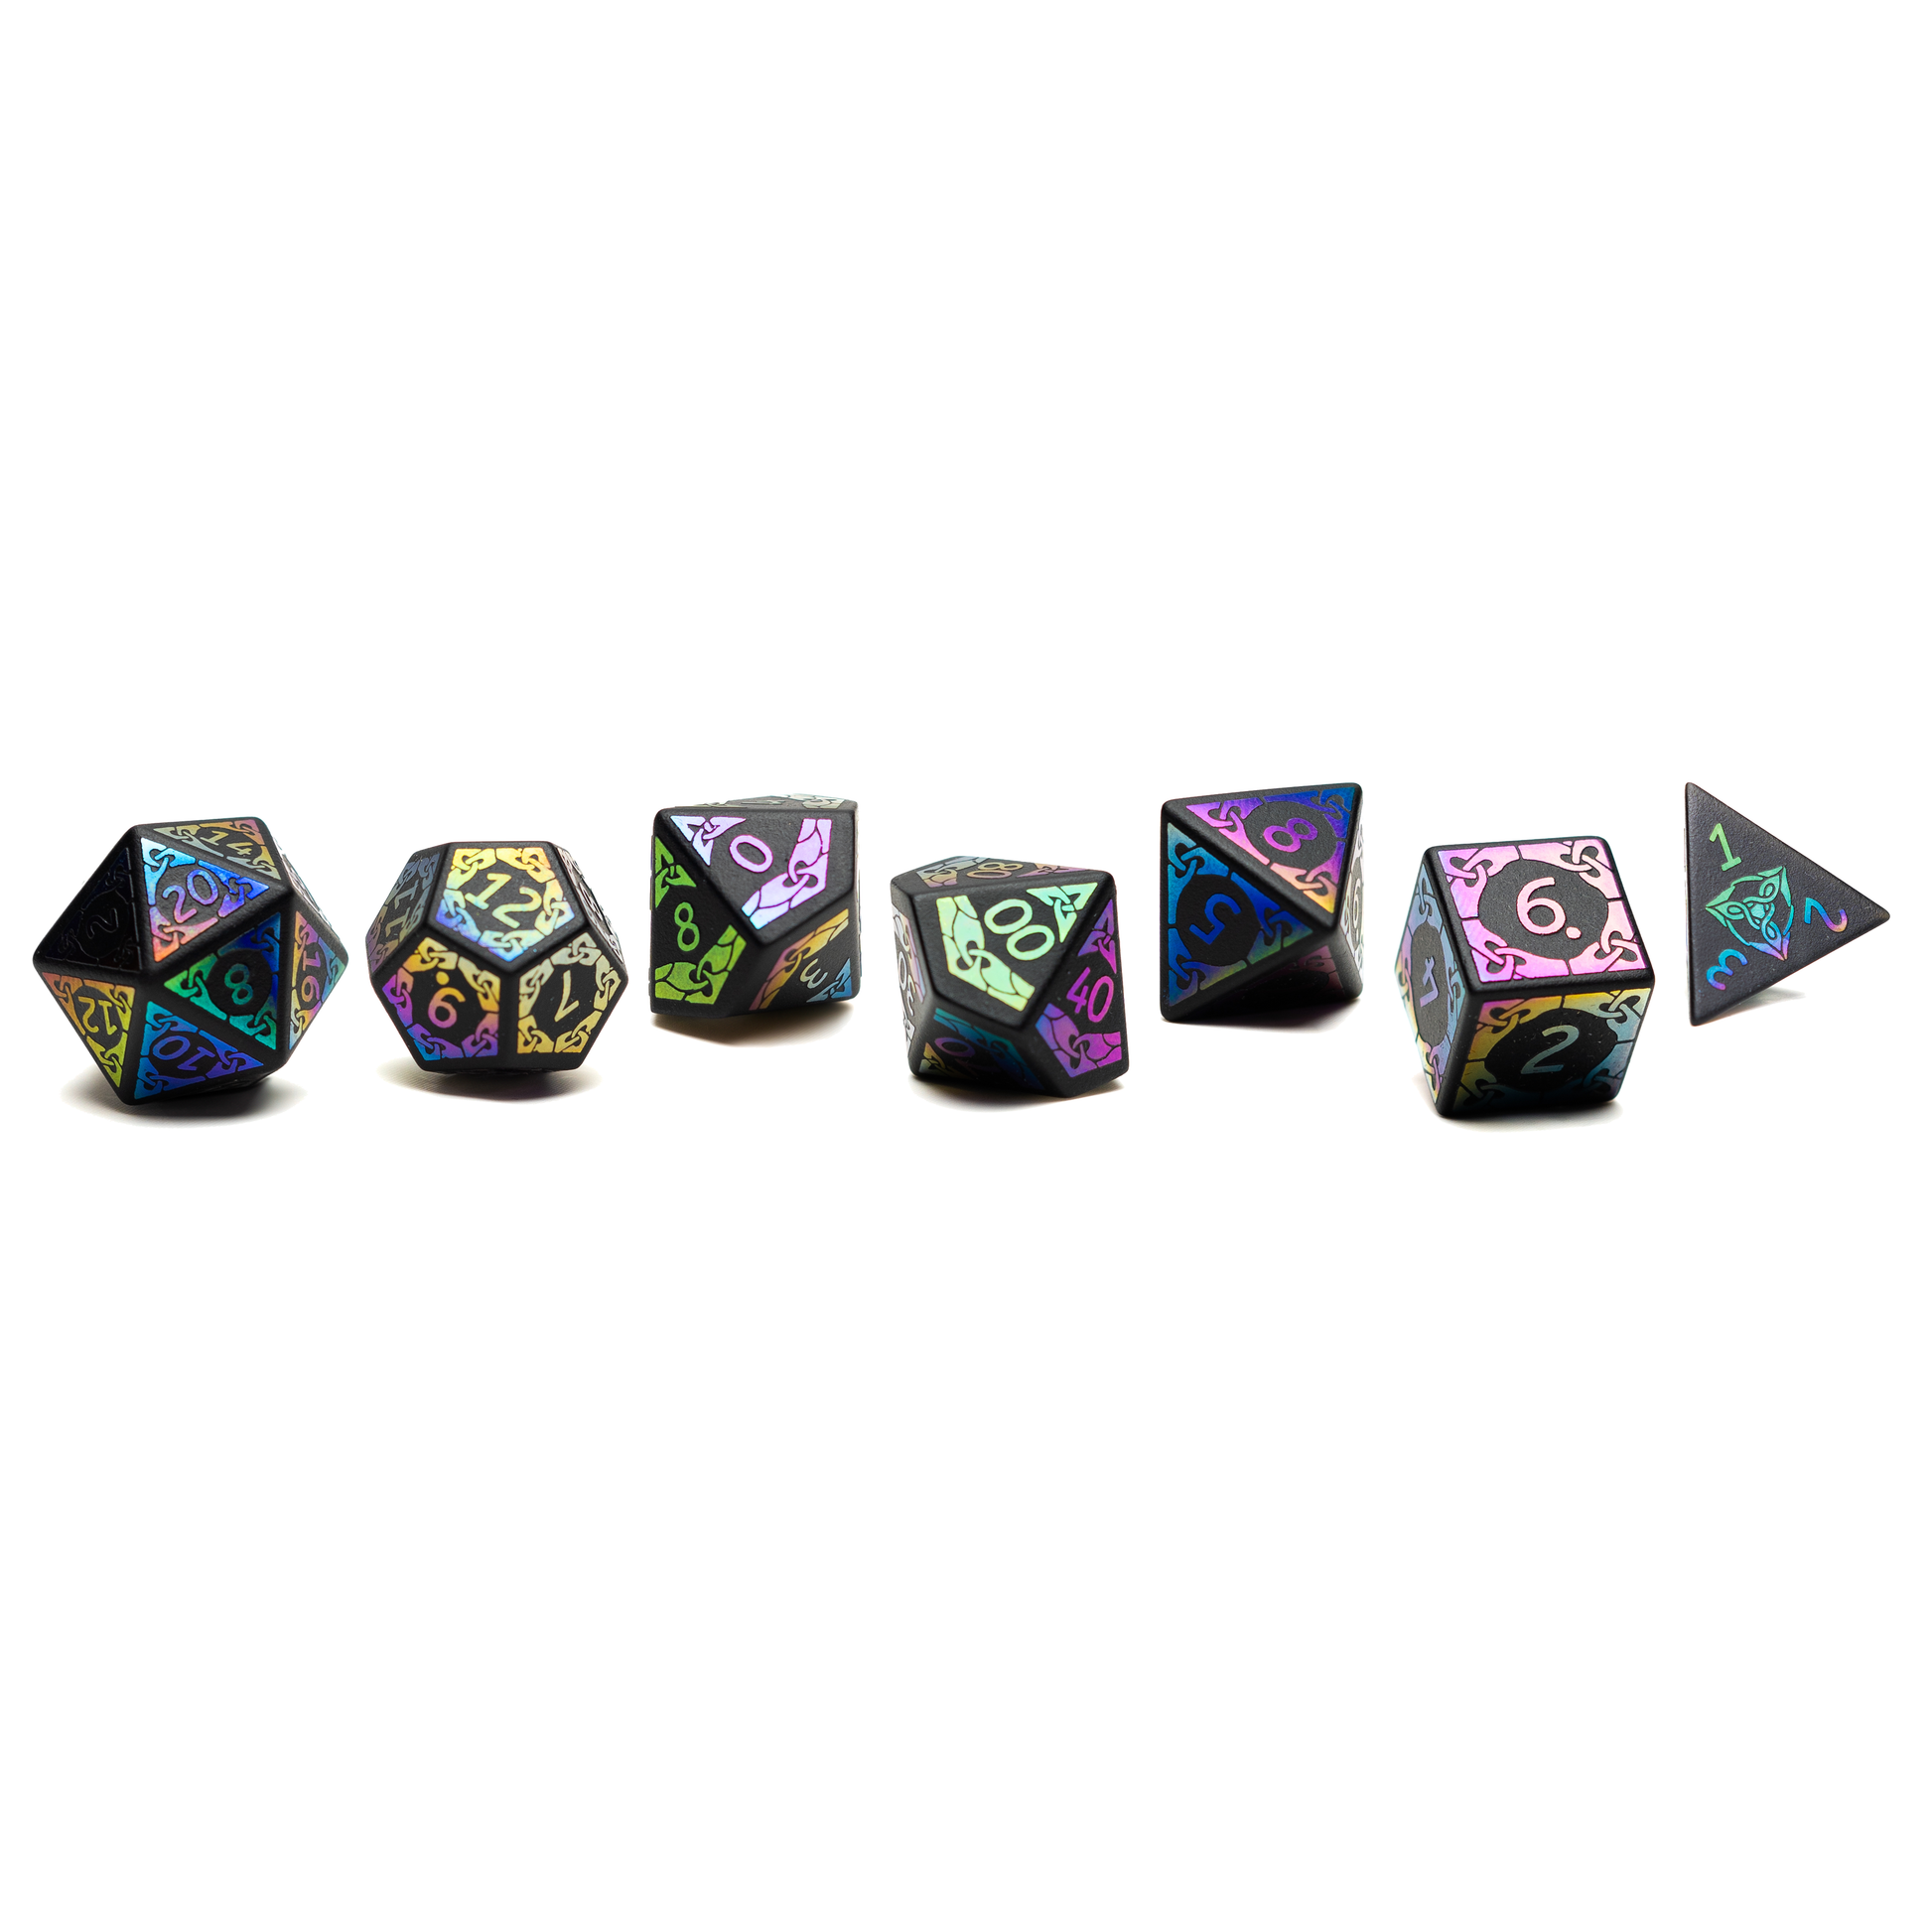 Roll Britannia Sharp Edged Obsidian Gemstone Dungeons and Dragons Dice Set with Iridescent aesthetic